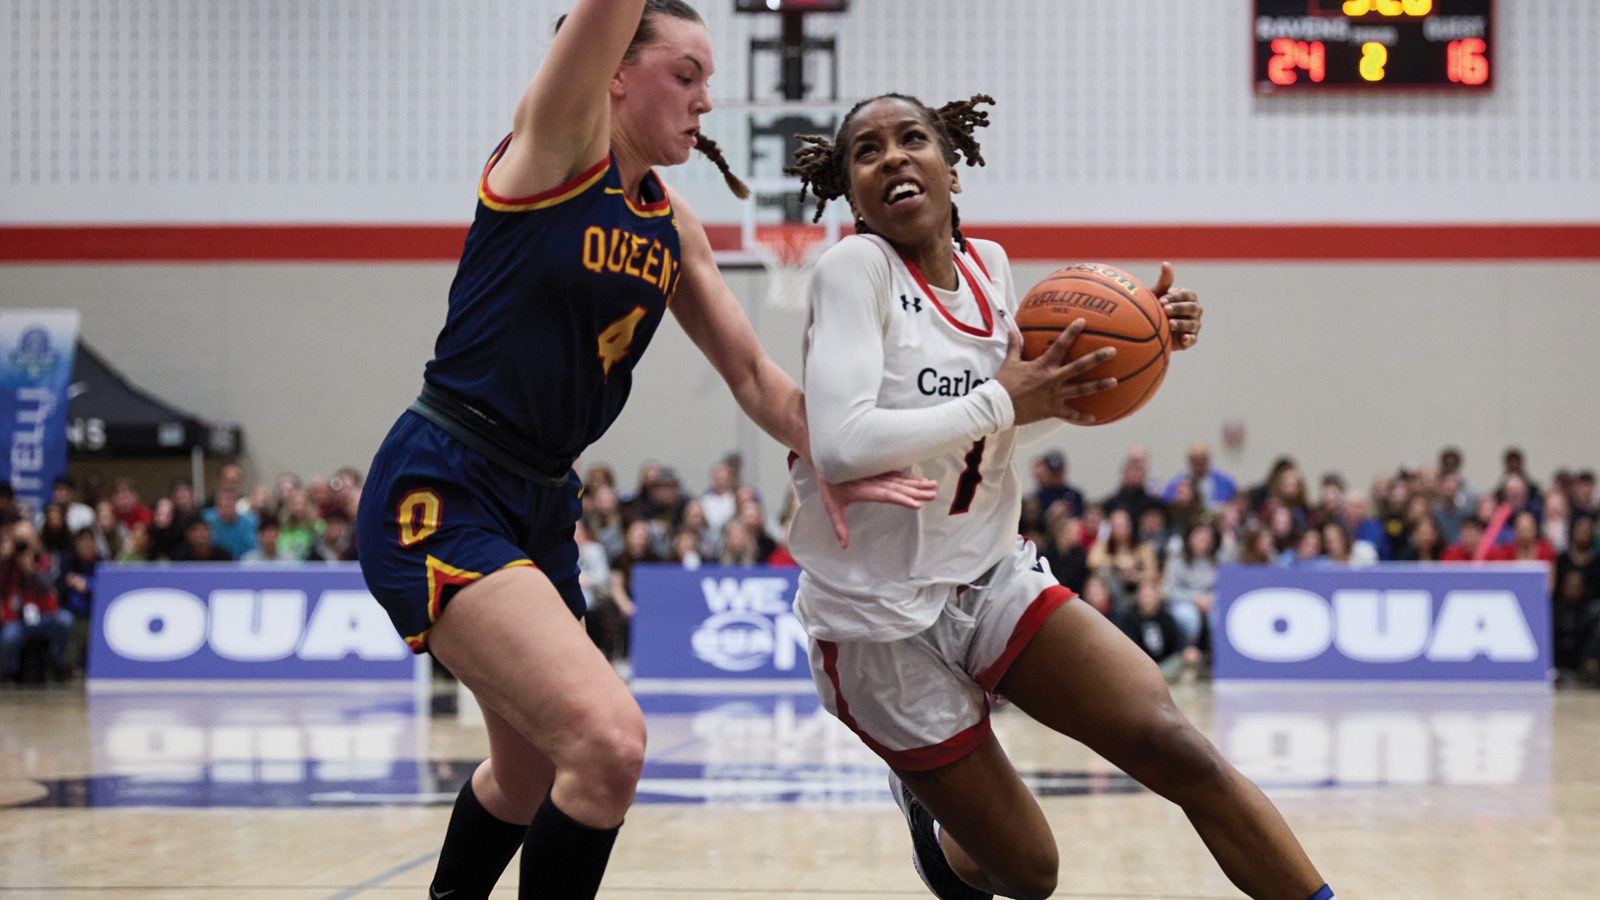 Carleton women's basketball player driving the ball through the lane against a Queen's defender during the OUA championship game